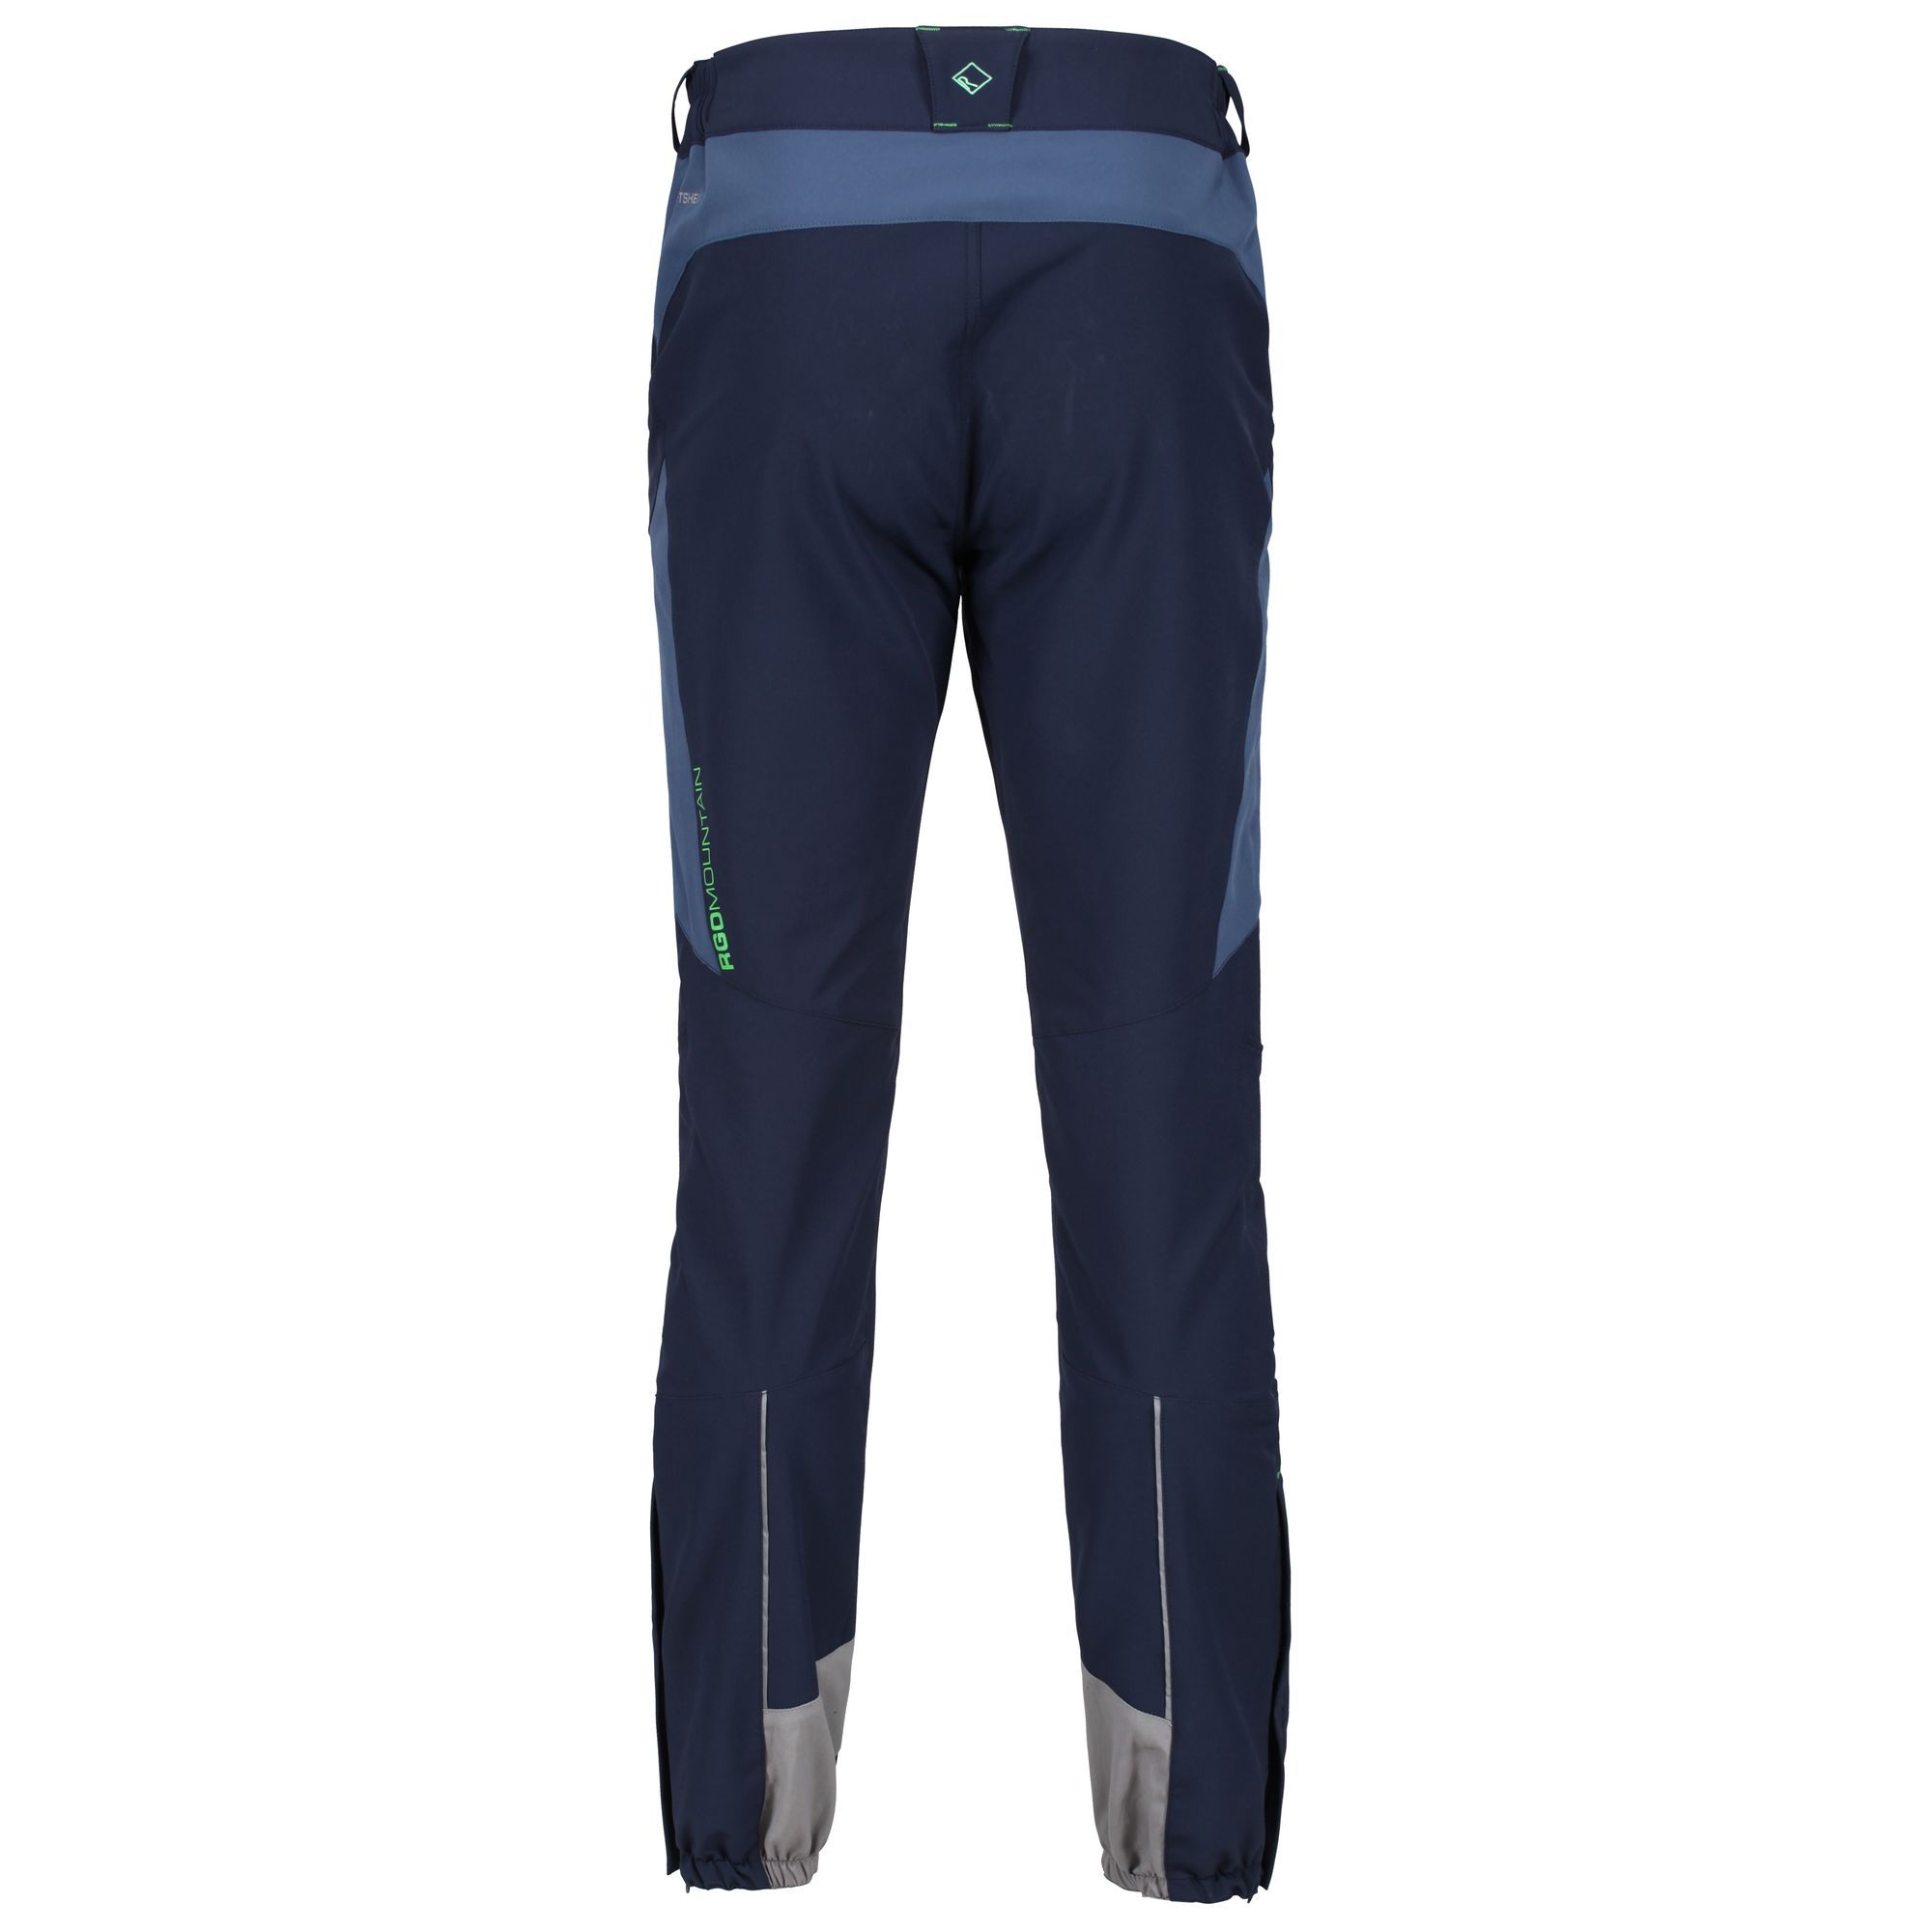 Mens trousers that deliver outstanding durability, mobility and weather protection. Durable water repellent finish finish. 2 zipped pockets. Part elasticated waist. Articulated knees for ease of movement. Materials: 91% polyester, 9% elastane.